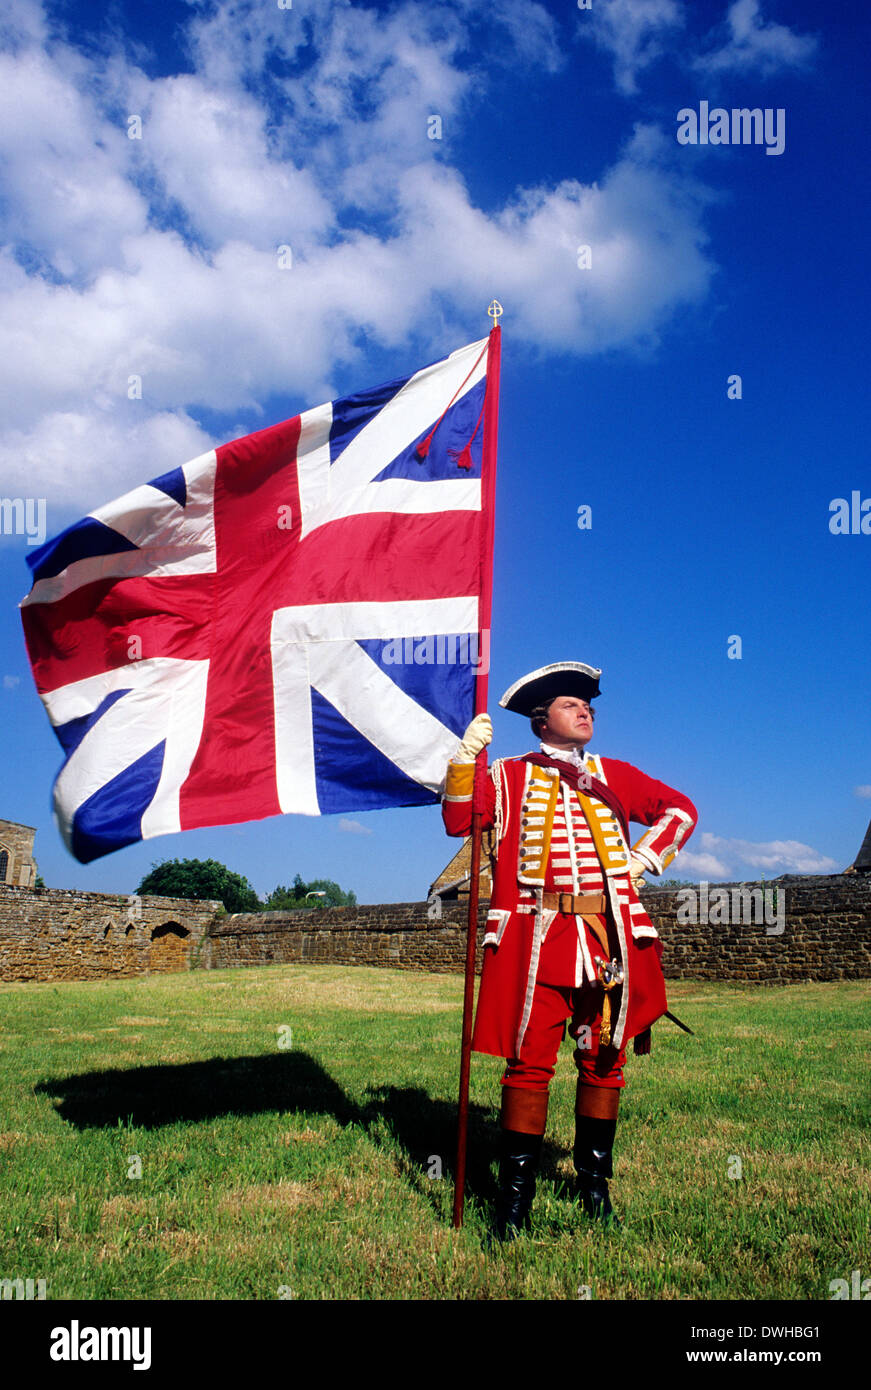 Historical re-enactment, British soldier, 1745, Union Flag, as deployed at the Battle of Culloden, redcoat English soldiers uniform uniforms England UK Stock Photo